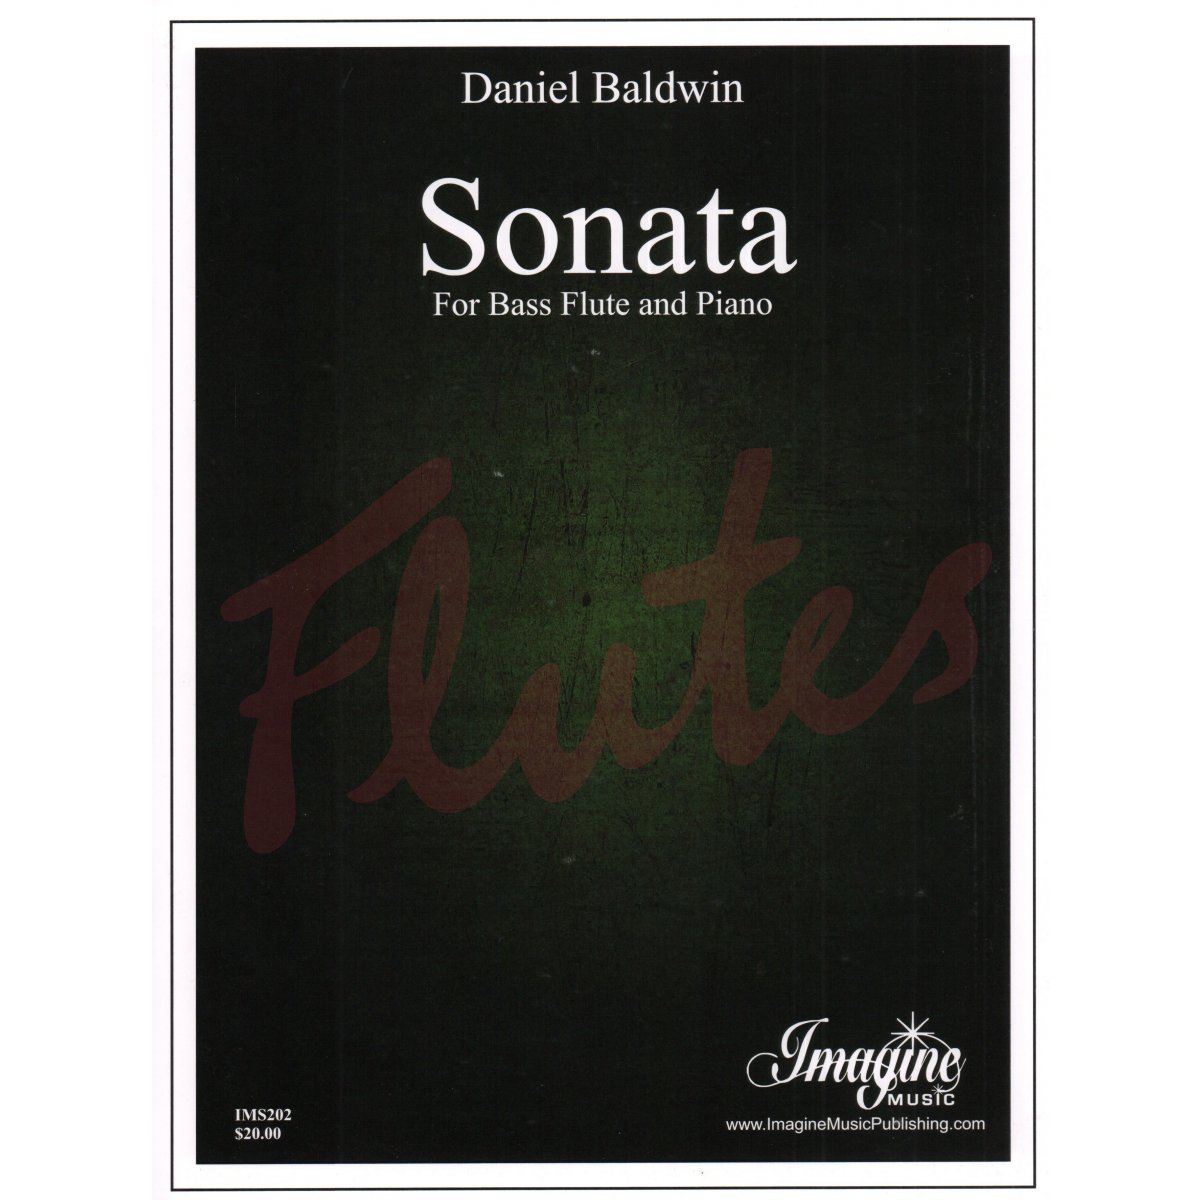 Sonata for Bass Flute and Piano